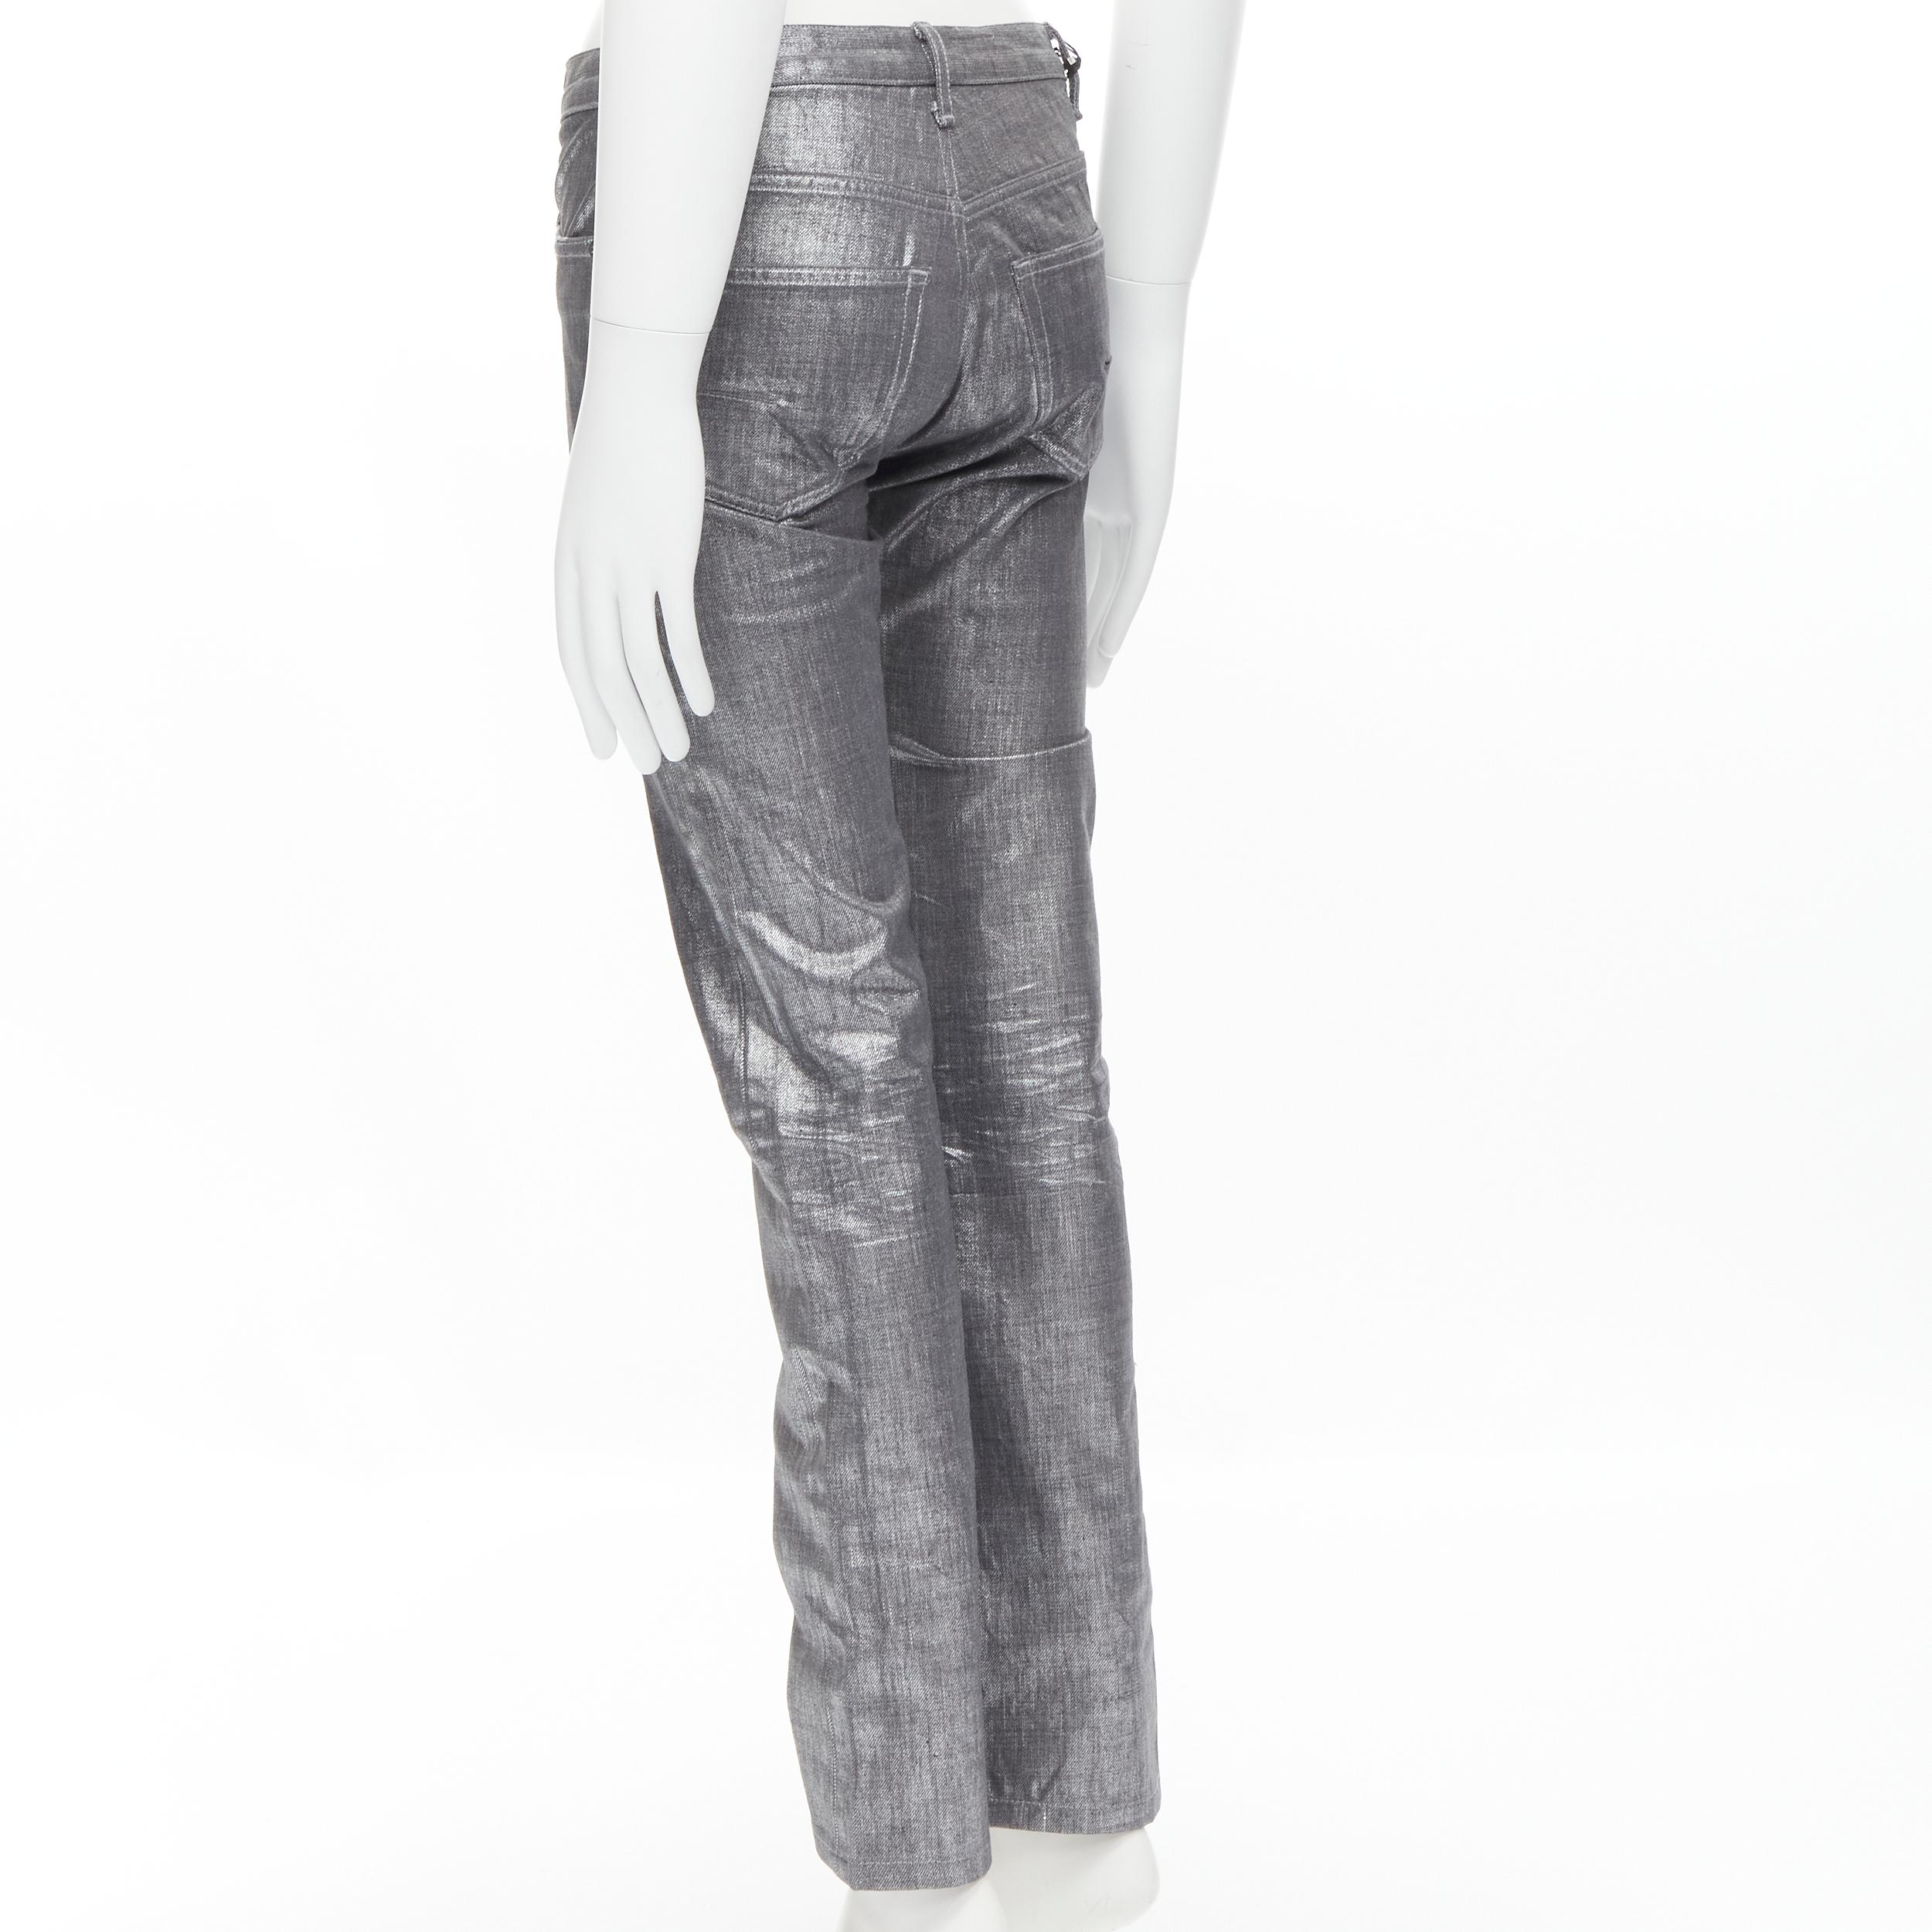 Silver new DIOR HOMME Hedi Slimane 2006 Radioactive silver painted skinny jeans 